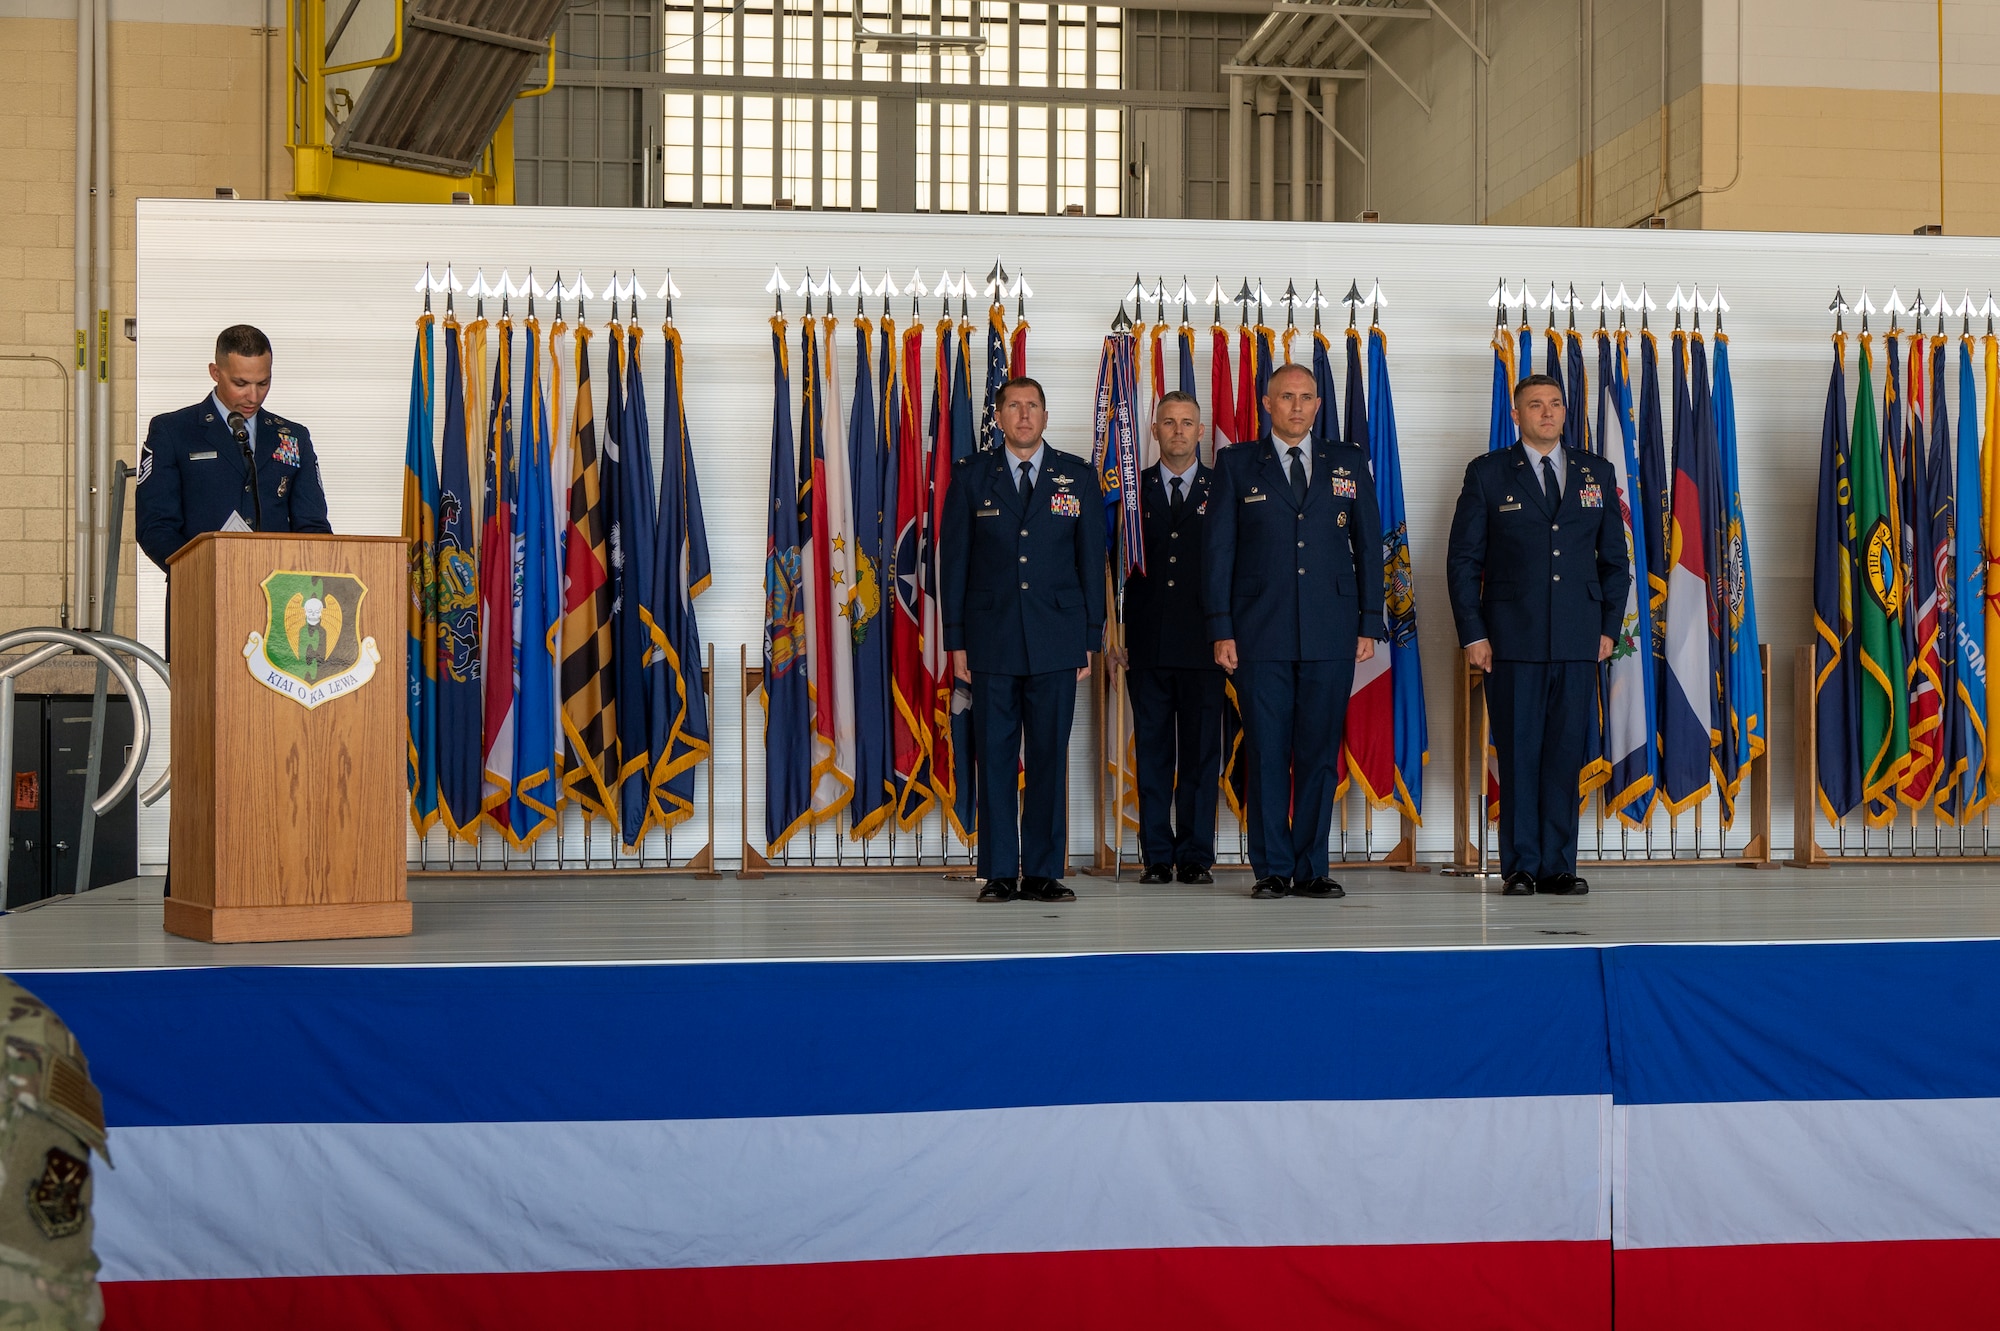 Col. Michael Maginess, outgoing 5th Mission Support Group (MSG) commander, gives his final remarks at the 5th MSG change of command ceremony at Minot Air Force Base, North Dakota, June 2, 2023. Col. Jerry Ottinger assumed command of the 5th MSG during the ceremony. (U.S. Air Force photo by Senior Airman Evan Lichtenhan)